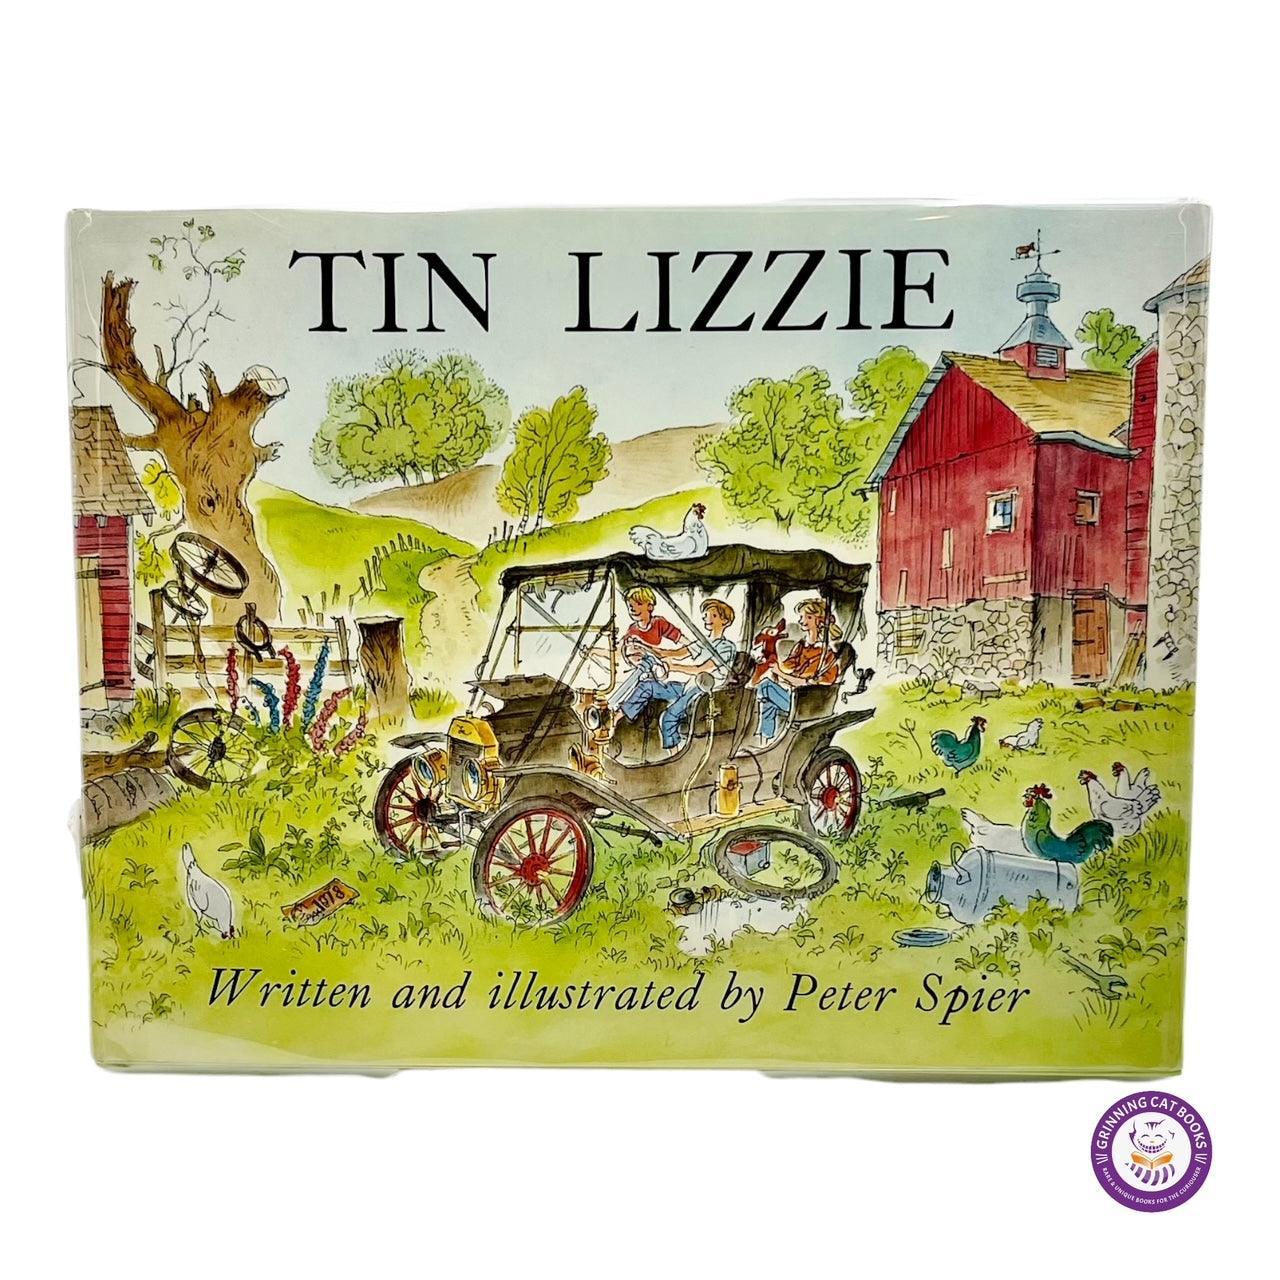 Tin Lizze (signed by Peter Spier) - Grinning Cat Books - CHILDREN'S LITERATURE - SIGNED